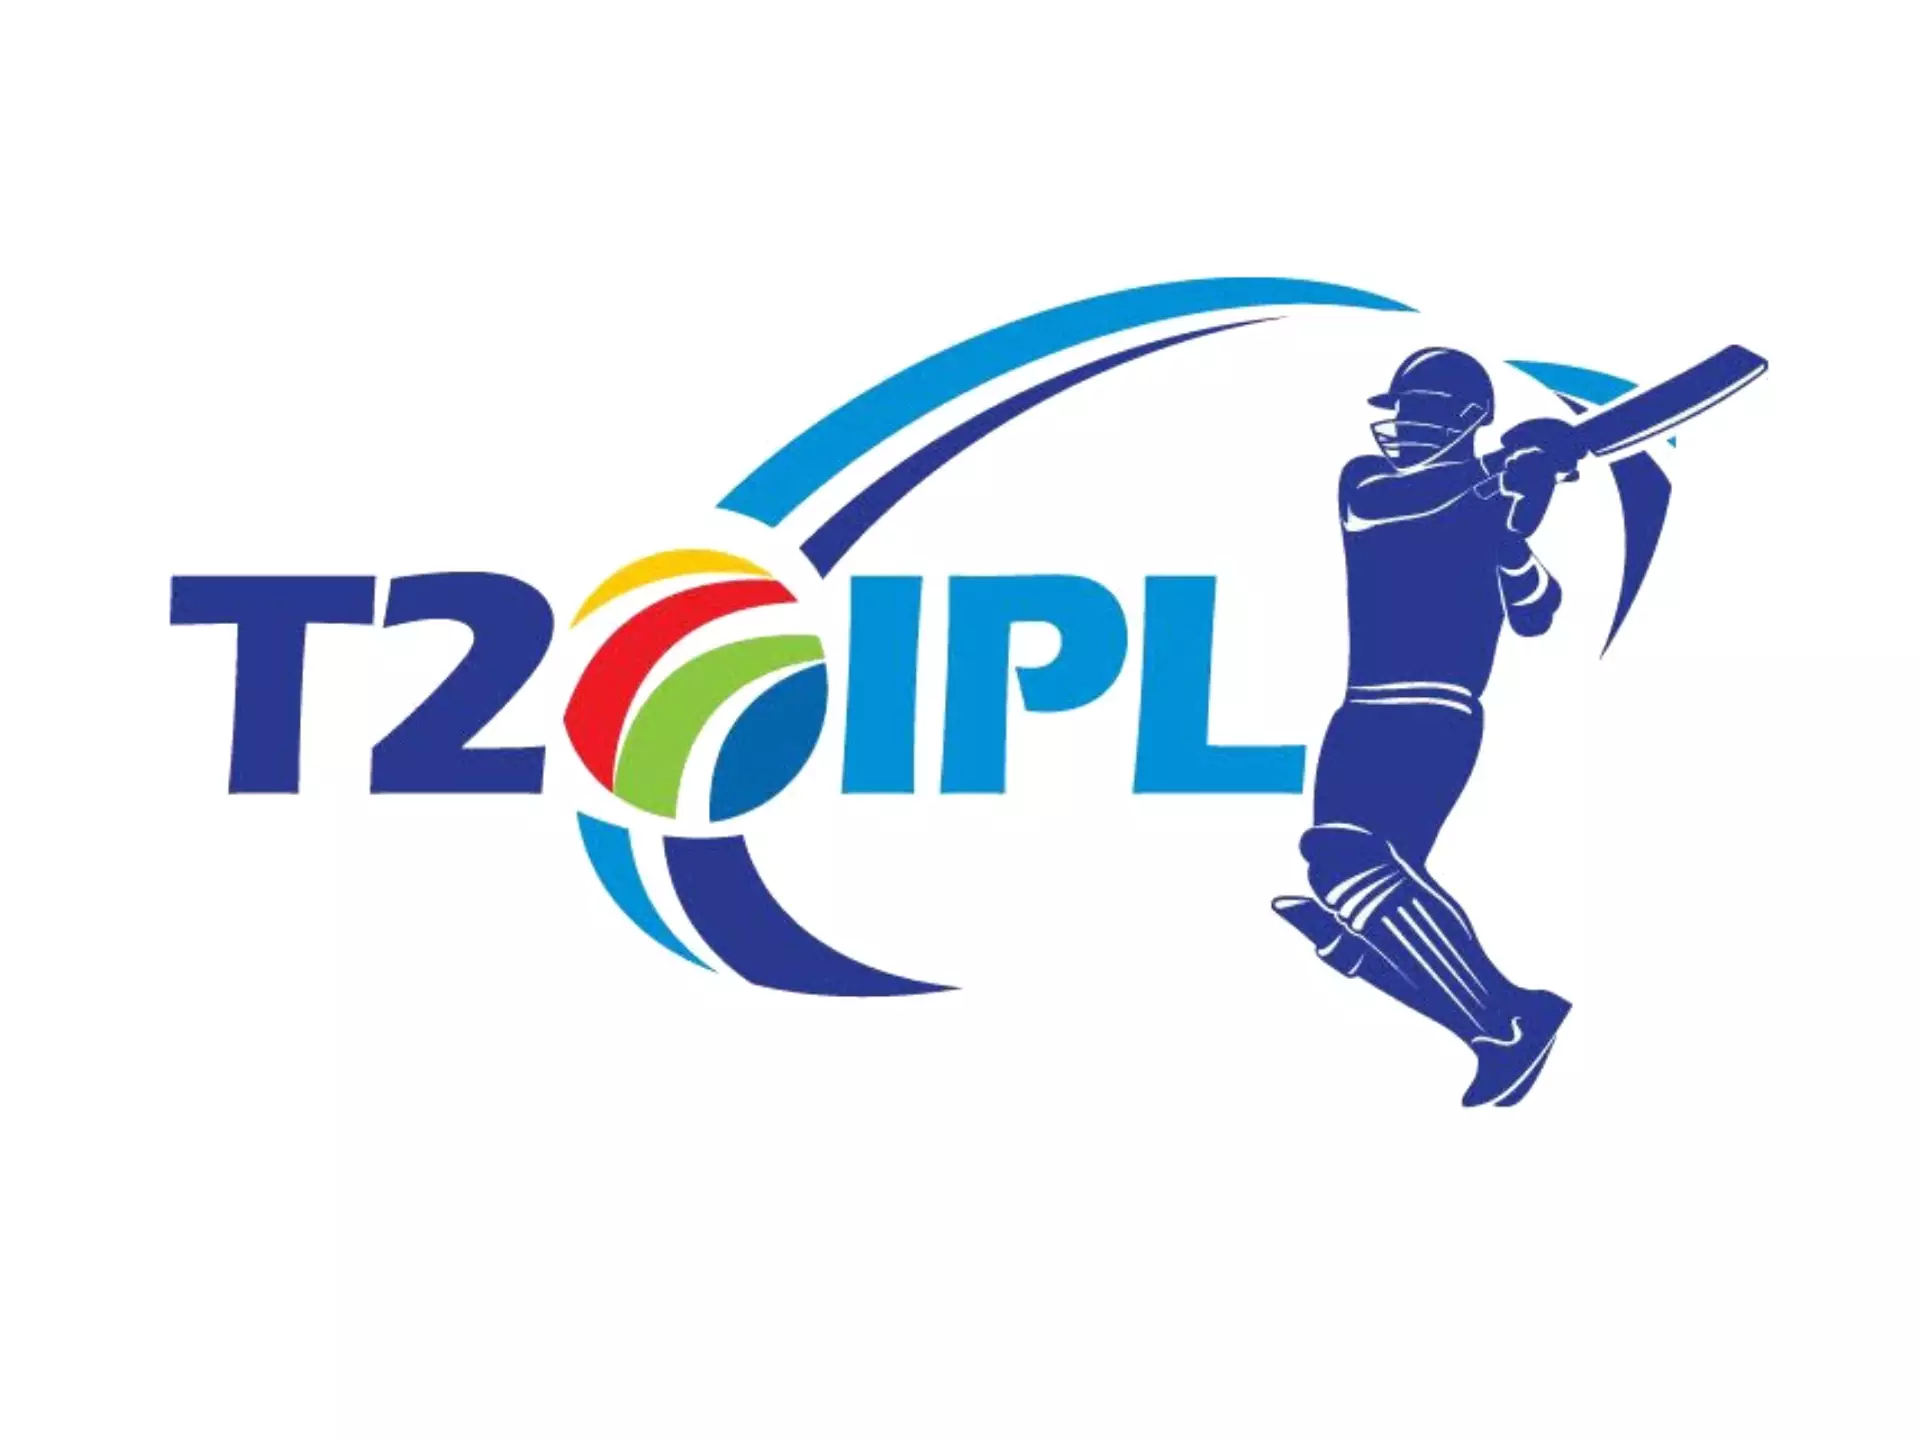 The most exciting way is to do live-betting on cricket durng the IPL.